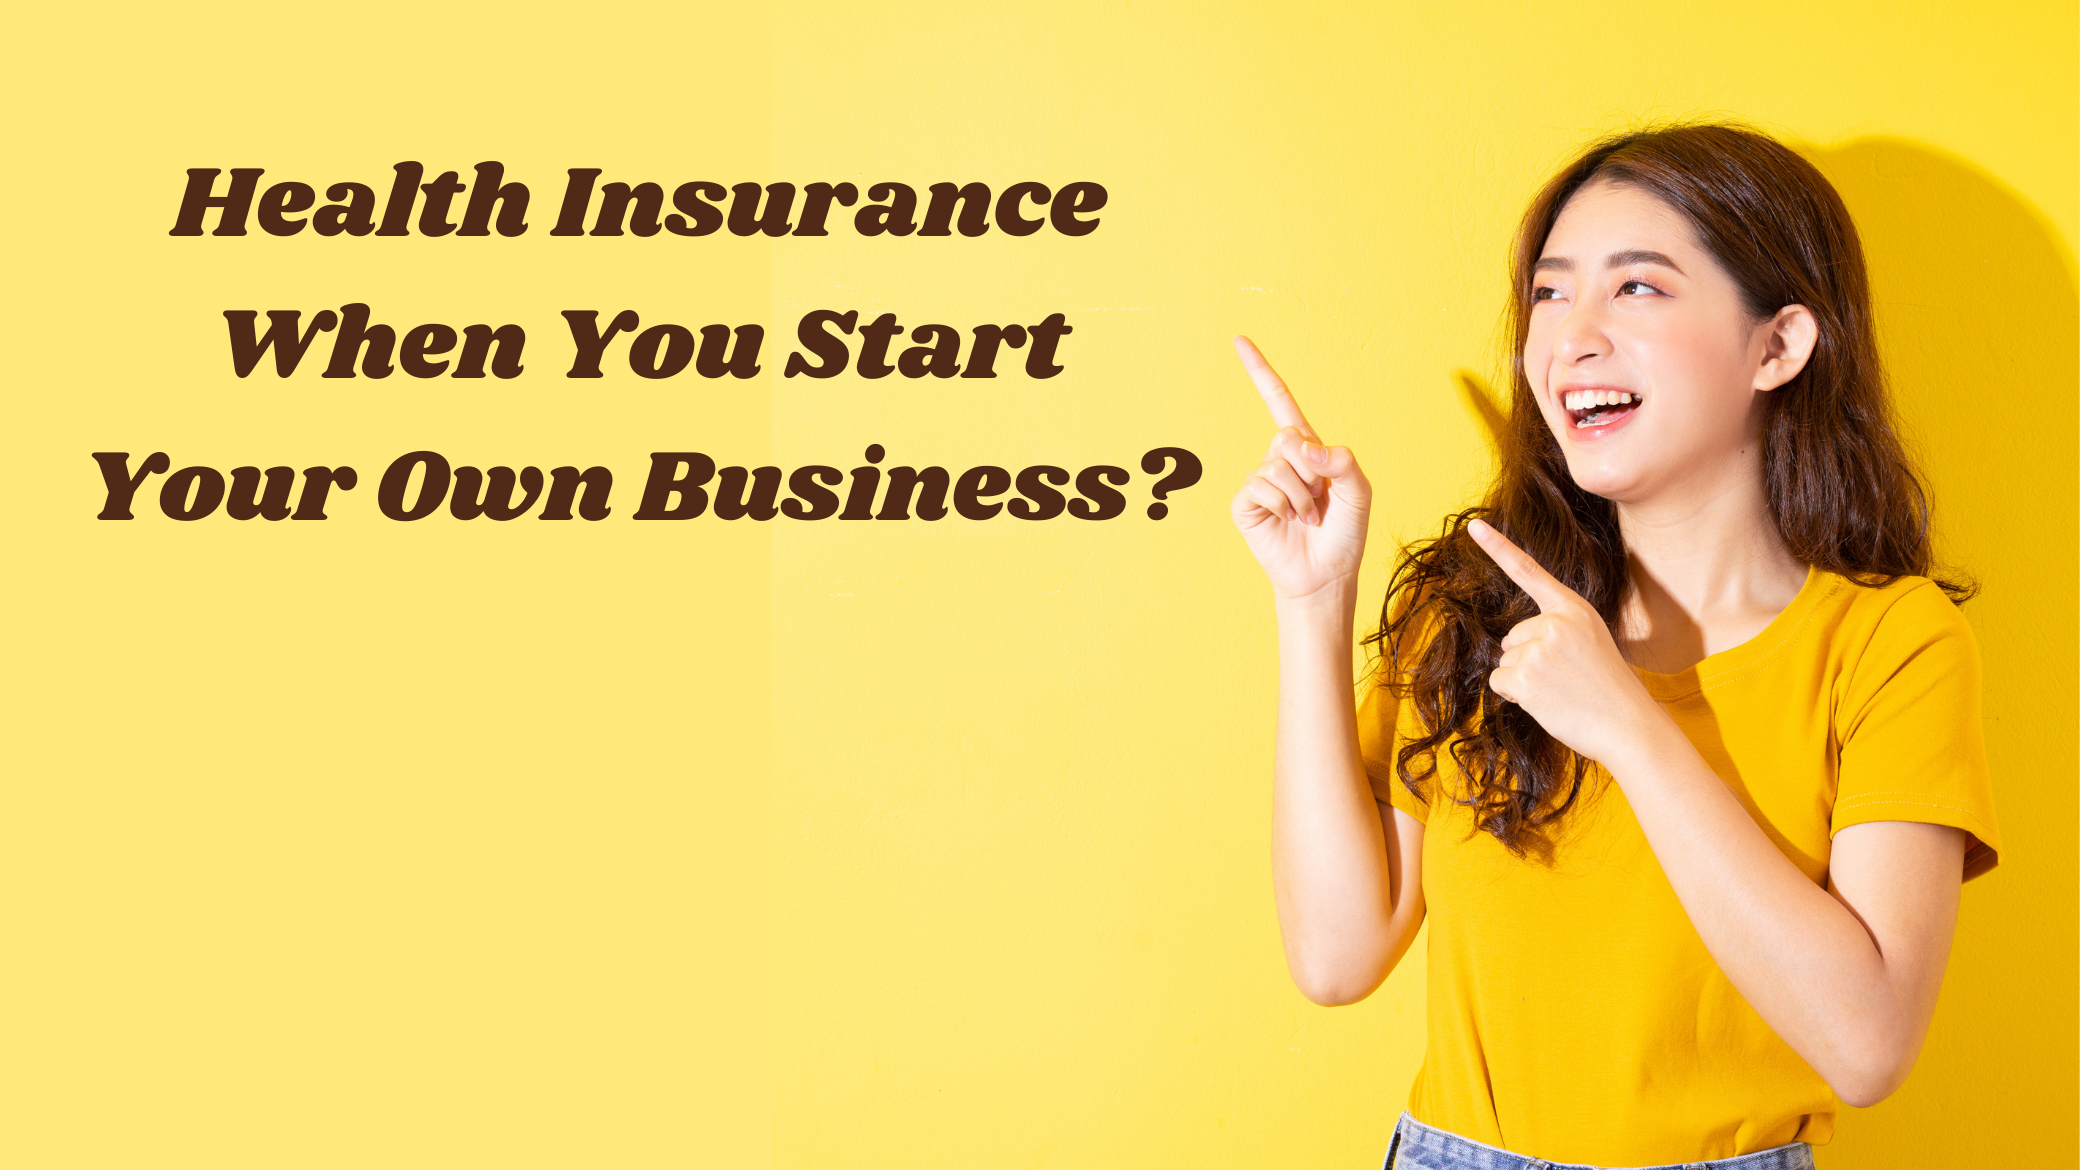 Health Insurance When You Start Your Own Business